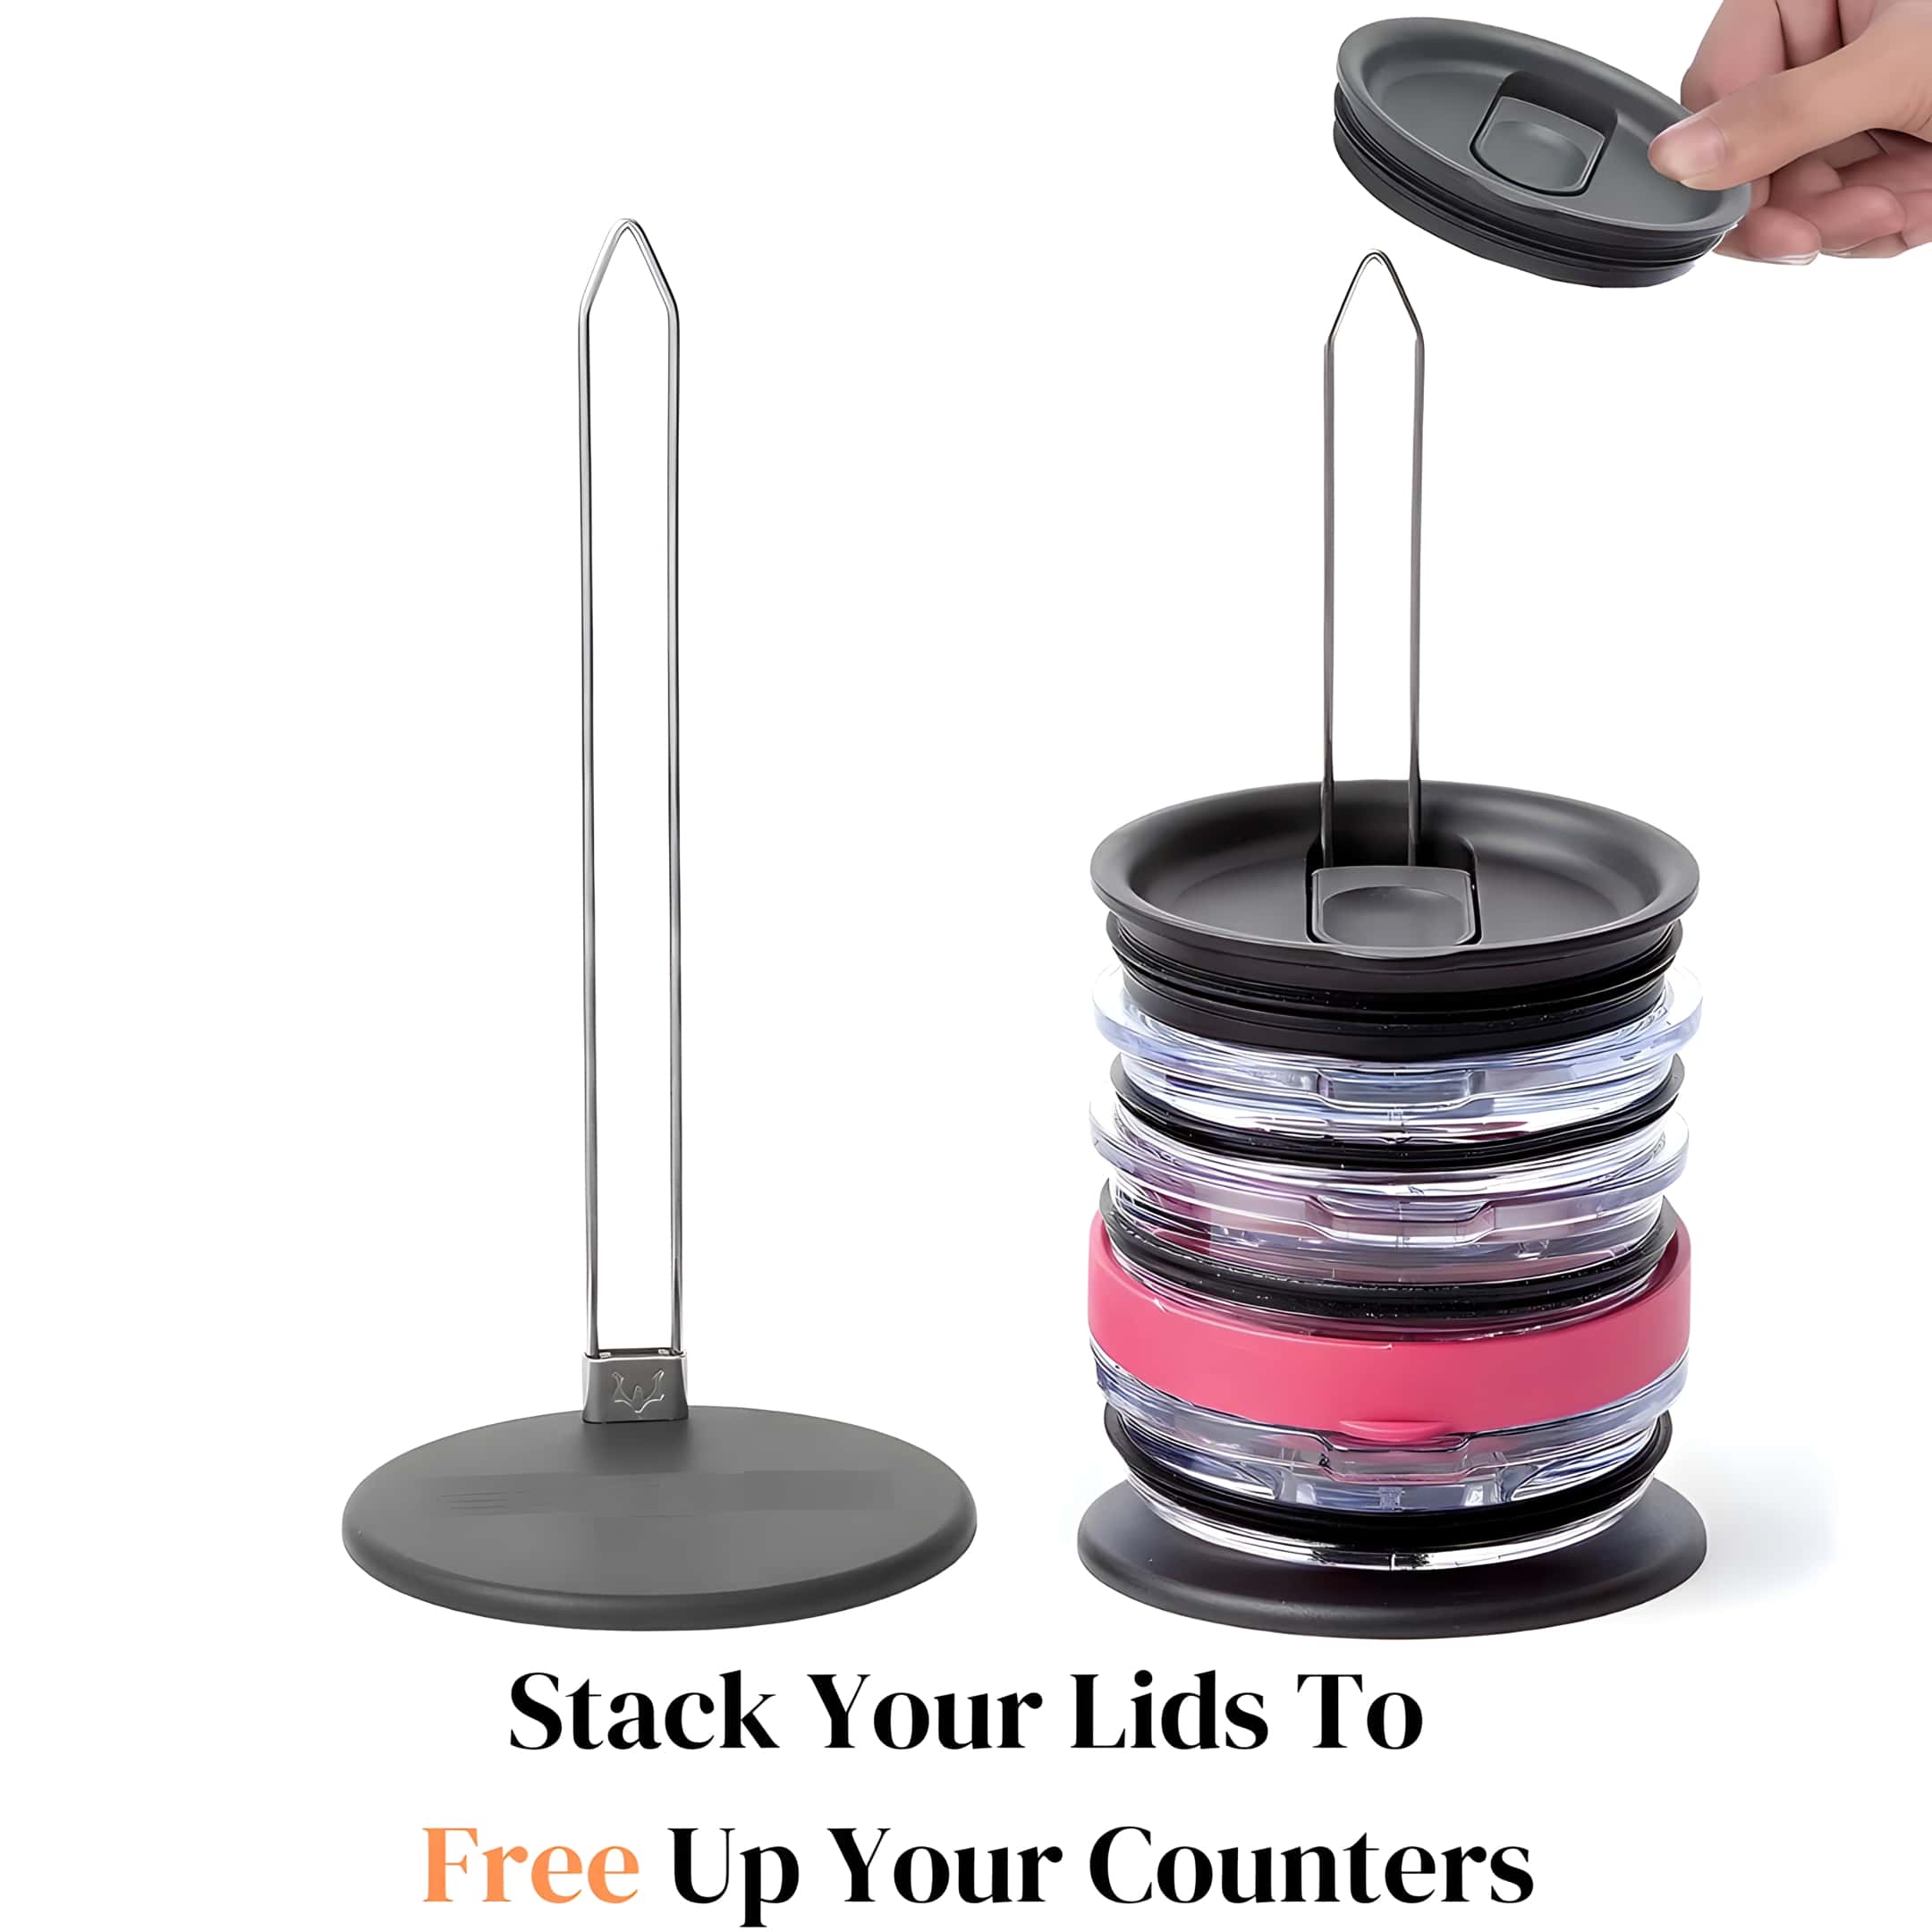 The Clean Up Your Counter Tumbler Lid Organizer (1 Pack)